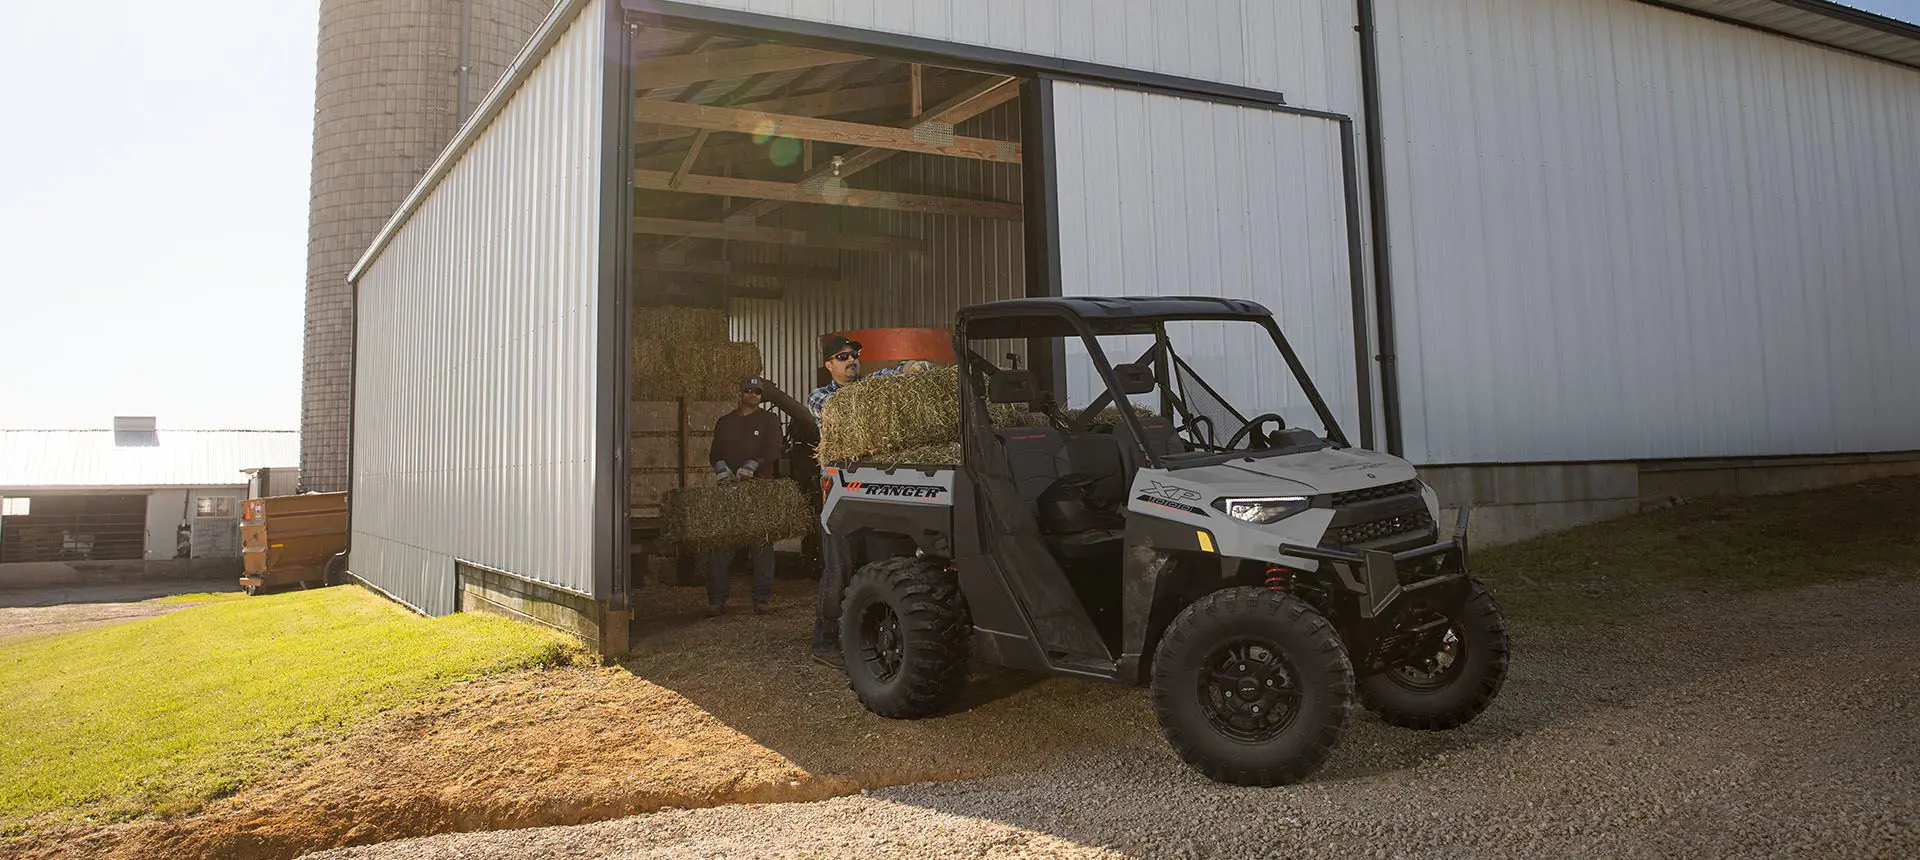 2 men loading square bales into cargo box on their Ranger XP 1000 Trail Boss